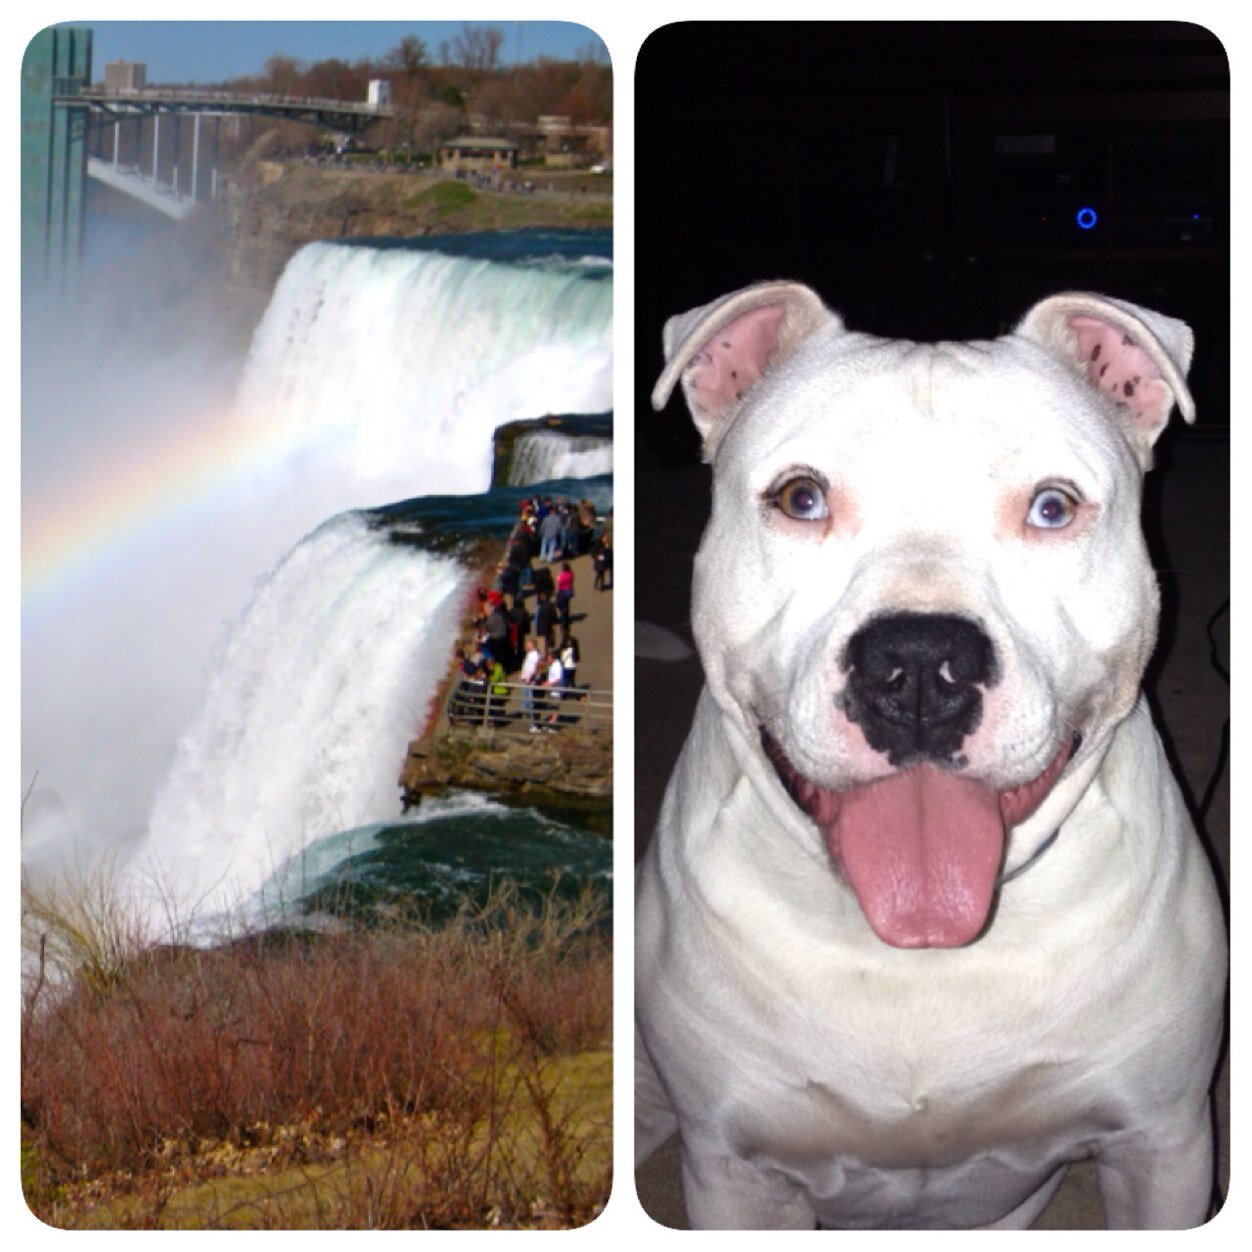 Welcome! 
Please sign our petition to help us build a dog park in NF, NY! 
http://t.co/agHzF5qNDU